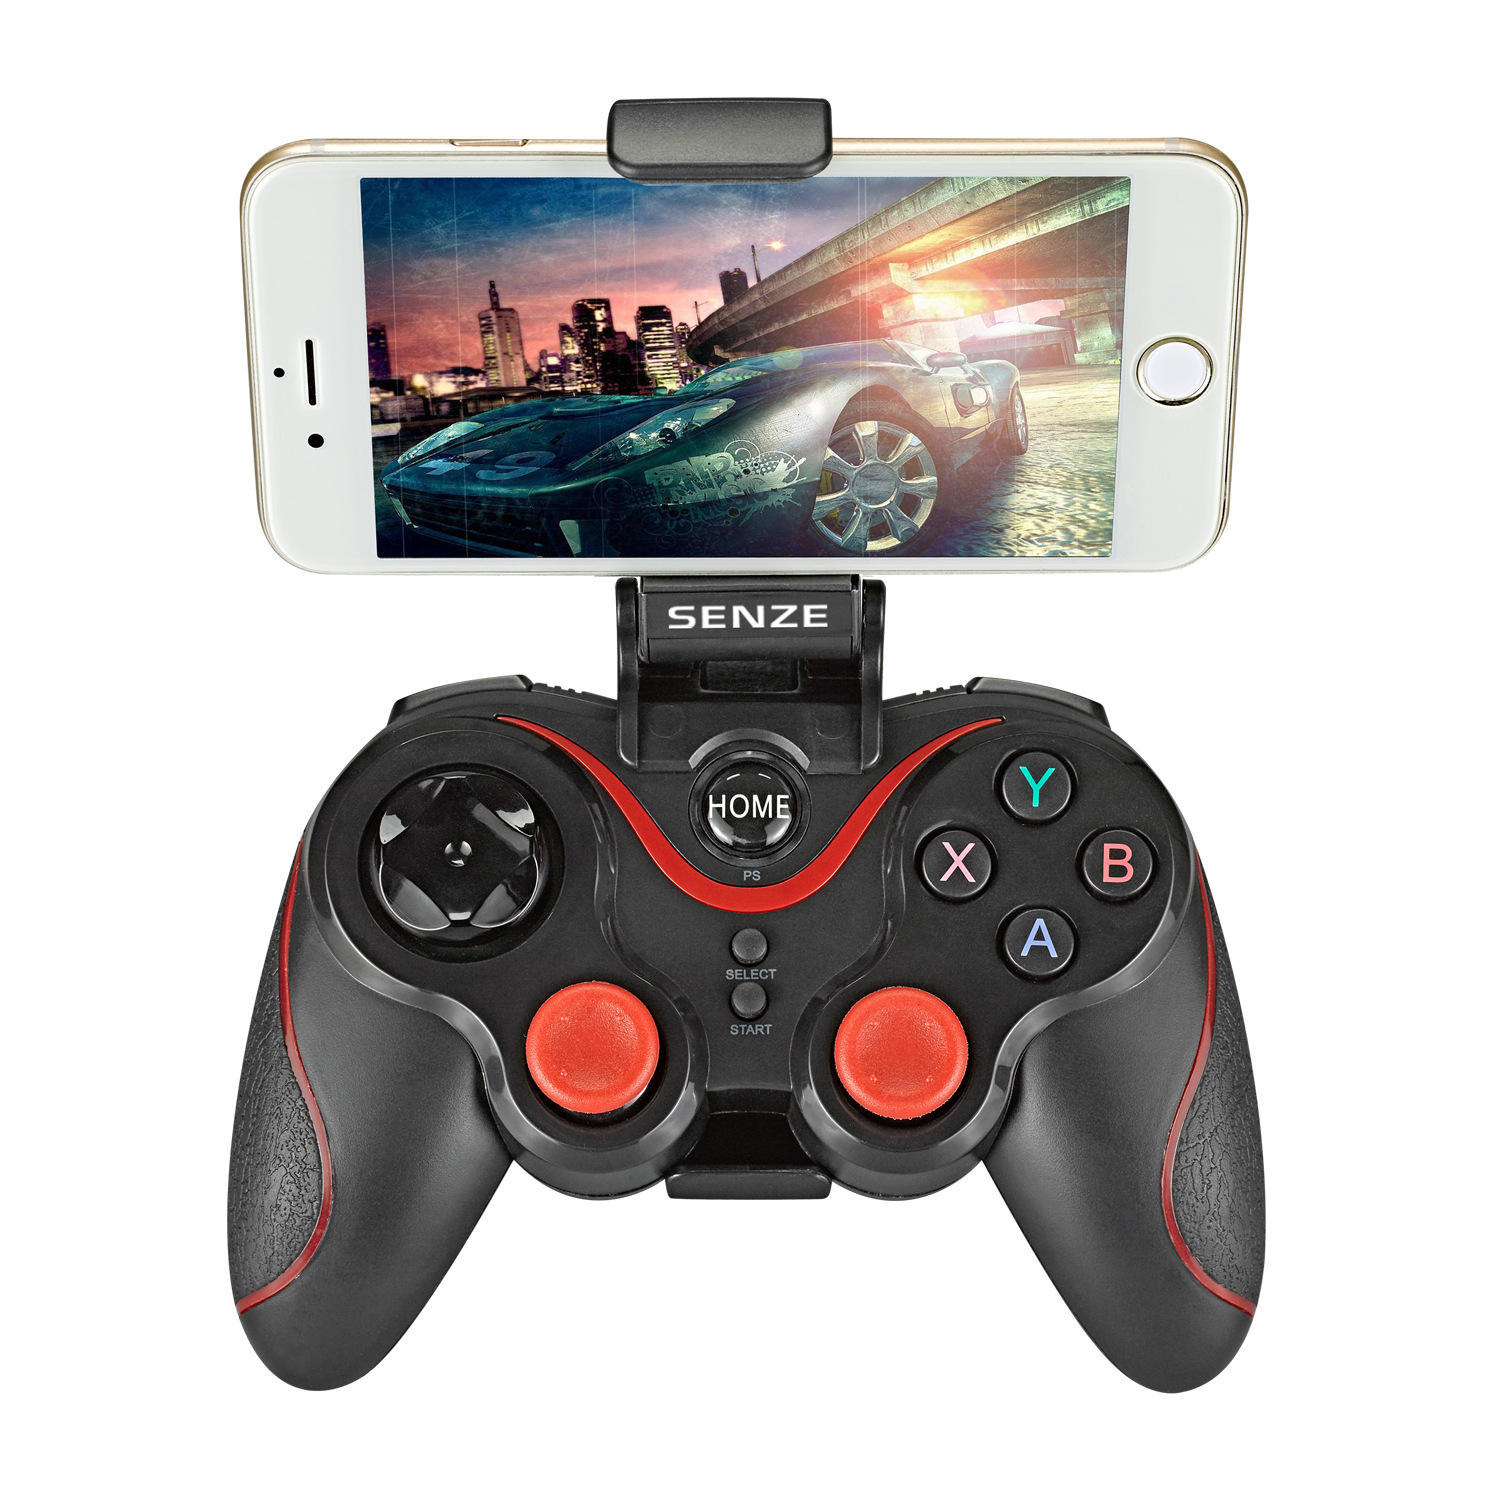 

Senze SZ-A1006 bluetooth Gamepad Game Controller for iOS Android Mobile Phone Tablet TV Box Smart TV PC